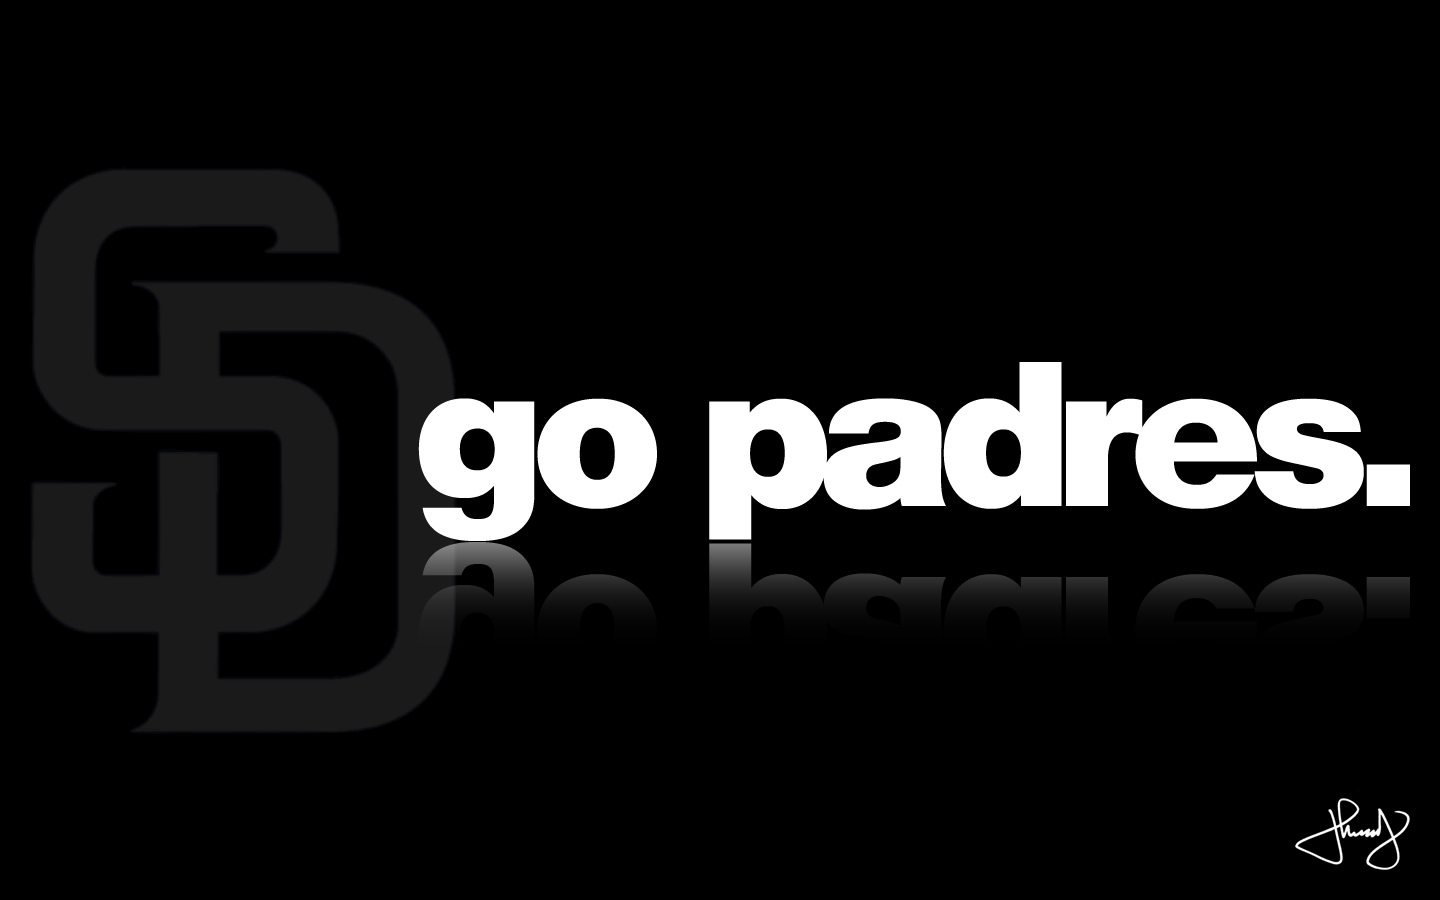  Pictures San Diego Padres Wallpaper HD Walls Find Wallpapers 1440x900